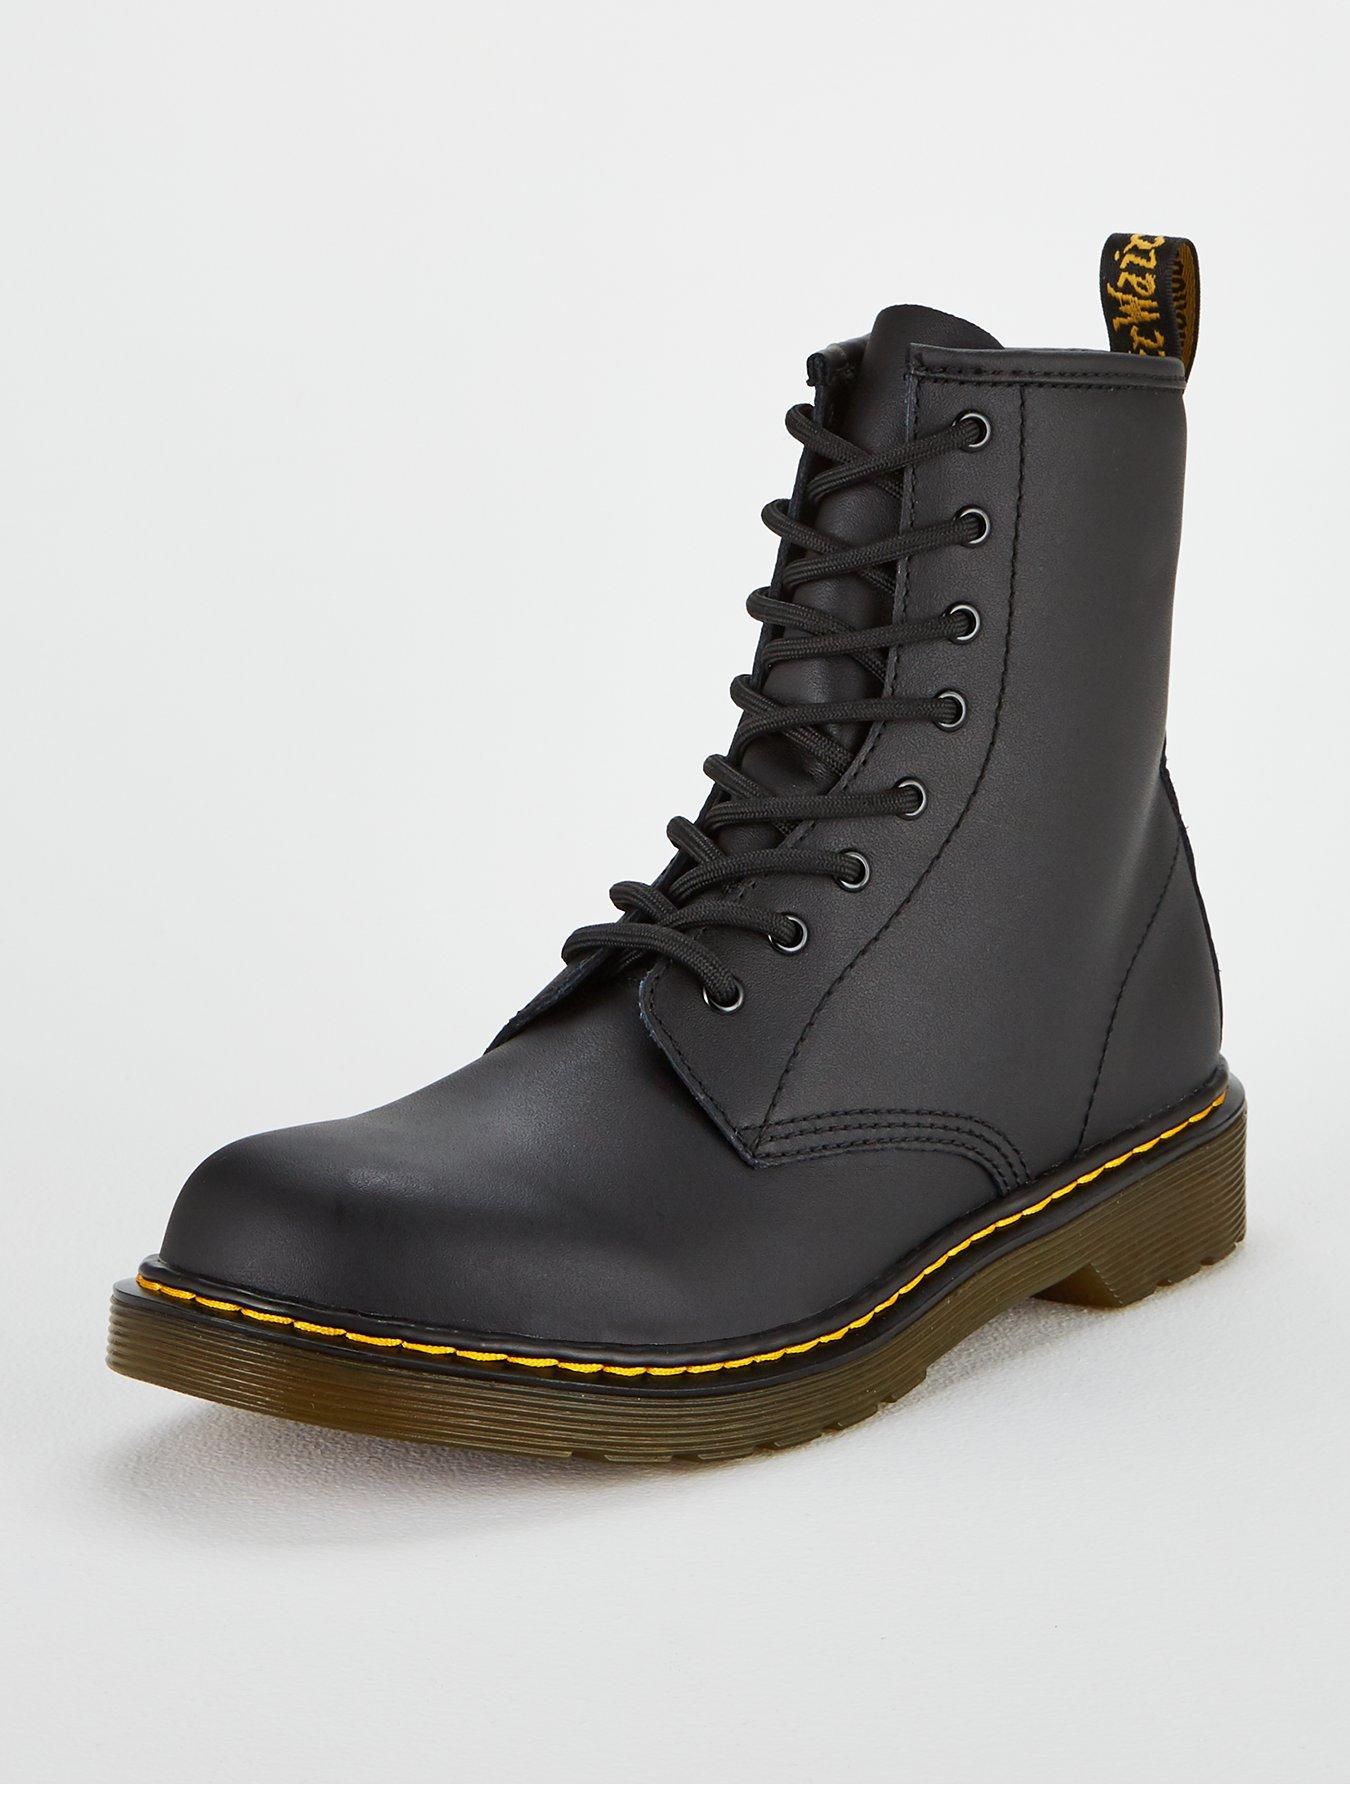 Dr Martens 1460 'Softy T' Boot - Black 